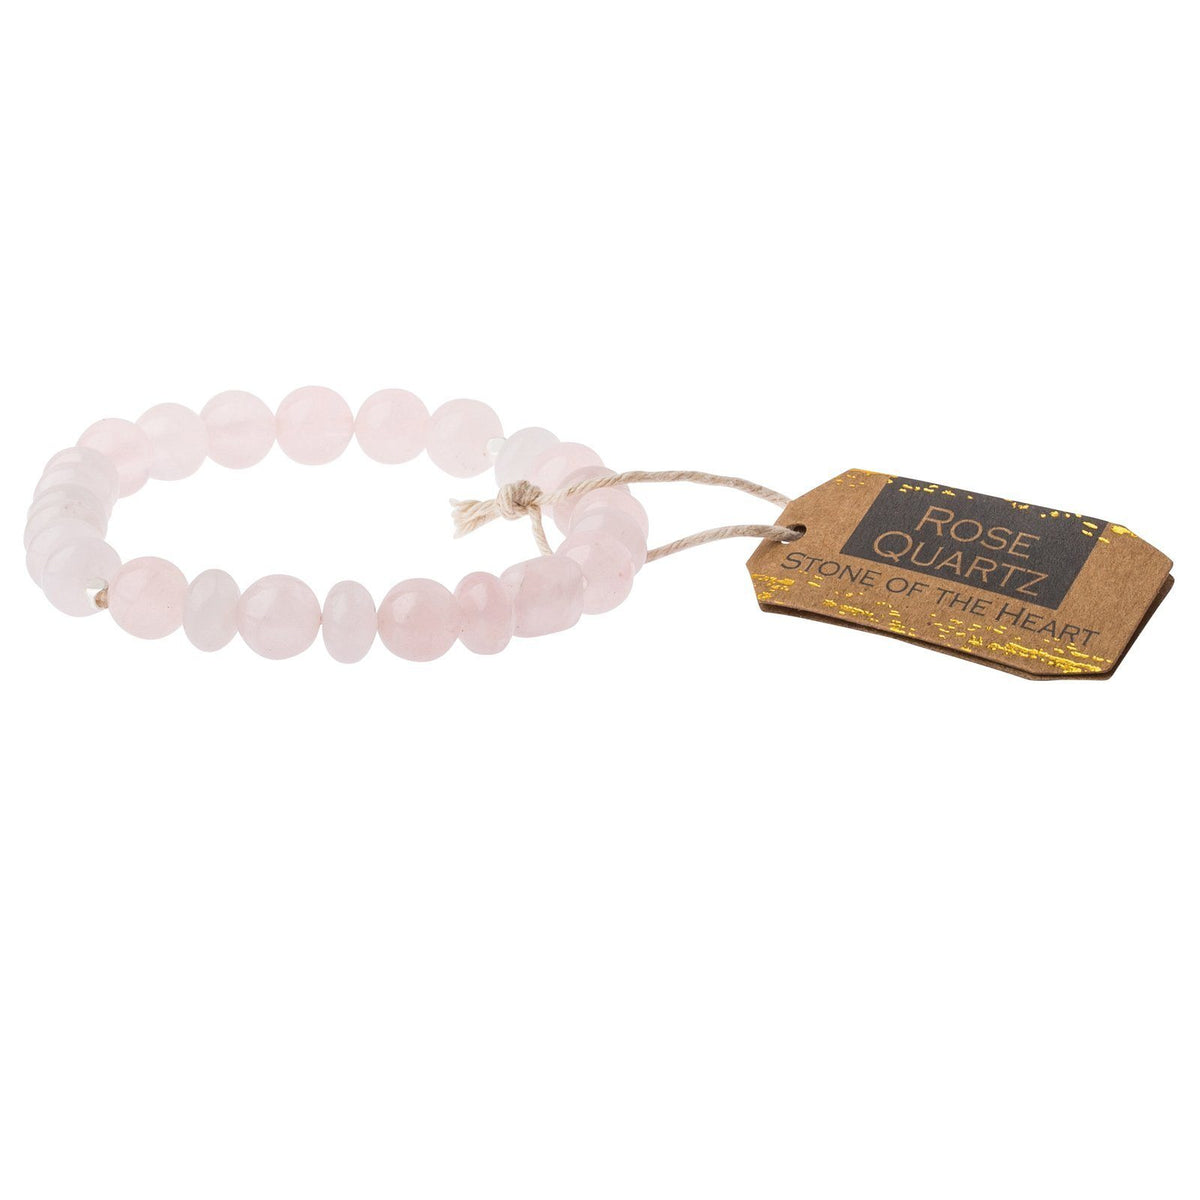 Scout Curated Wears Rose Quartz Stone Bracelet - Stone of the Heart (1733257297963)